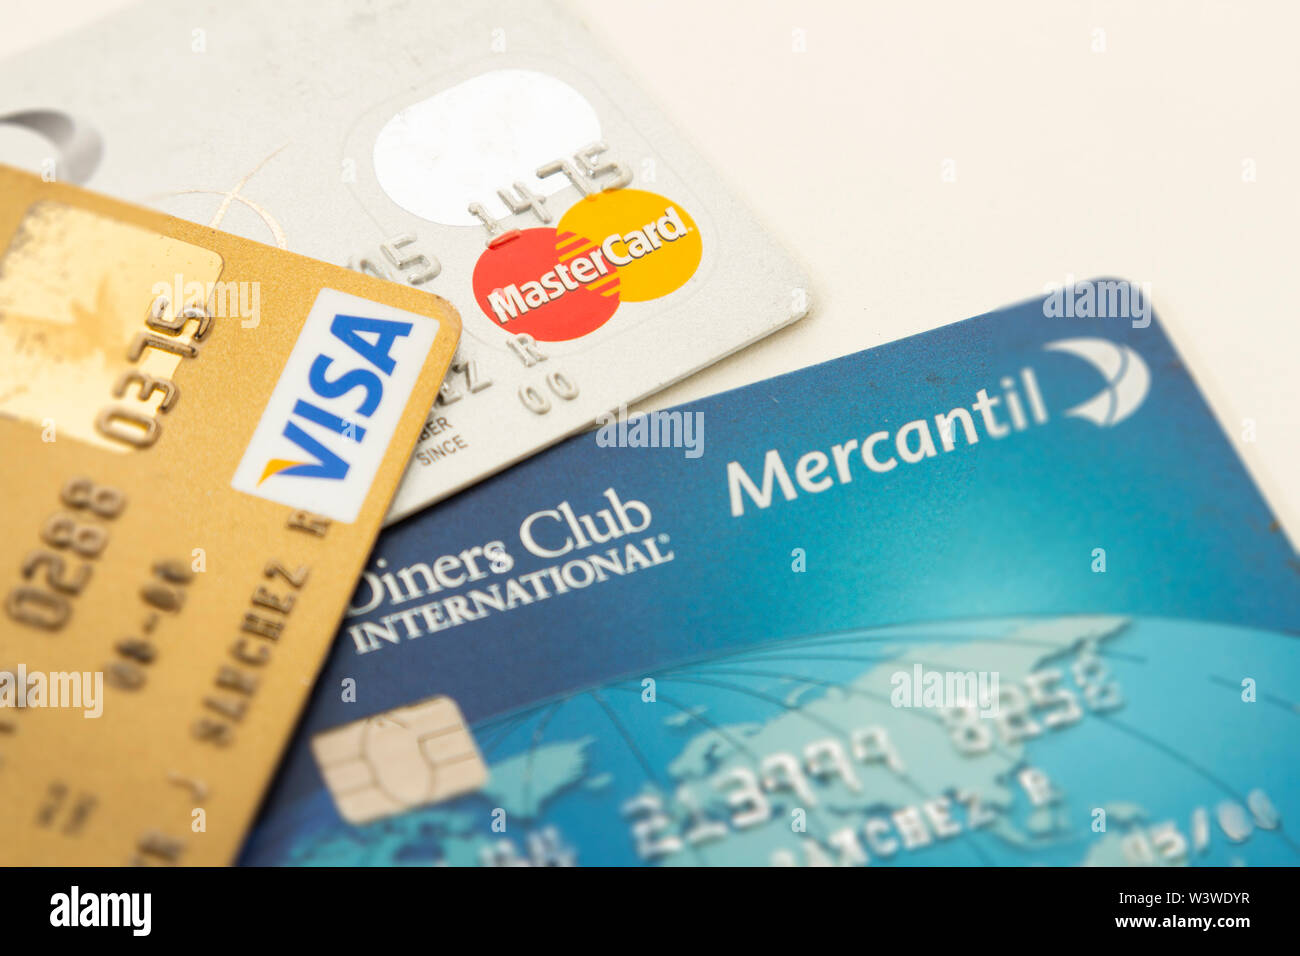 Several credit cards, Visa, Mastercard and Diners Club for use in Venezuela of Venezuelan banks. Stock Photo